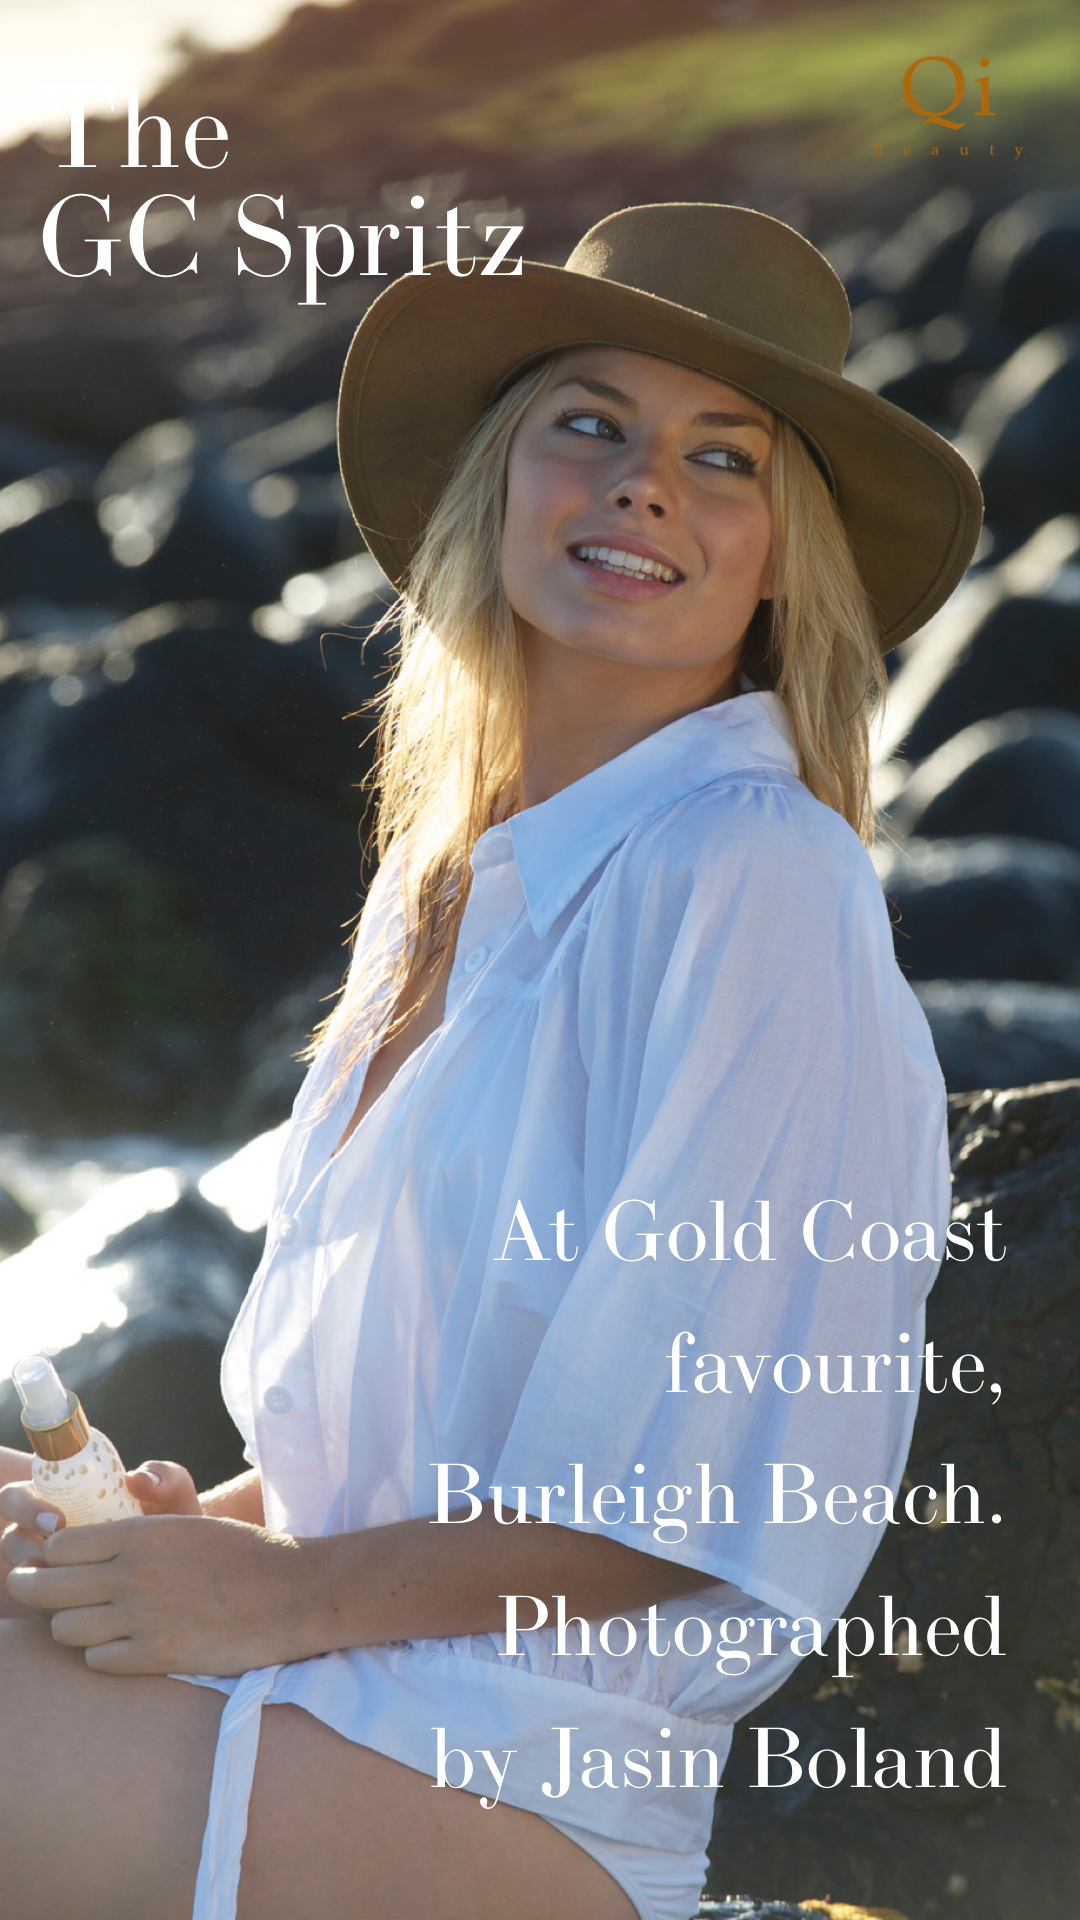 The Spritz_ Margot Robbie and the Qi beauty Spritz at Burleigh Headland